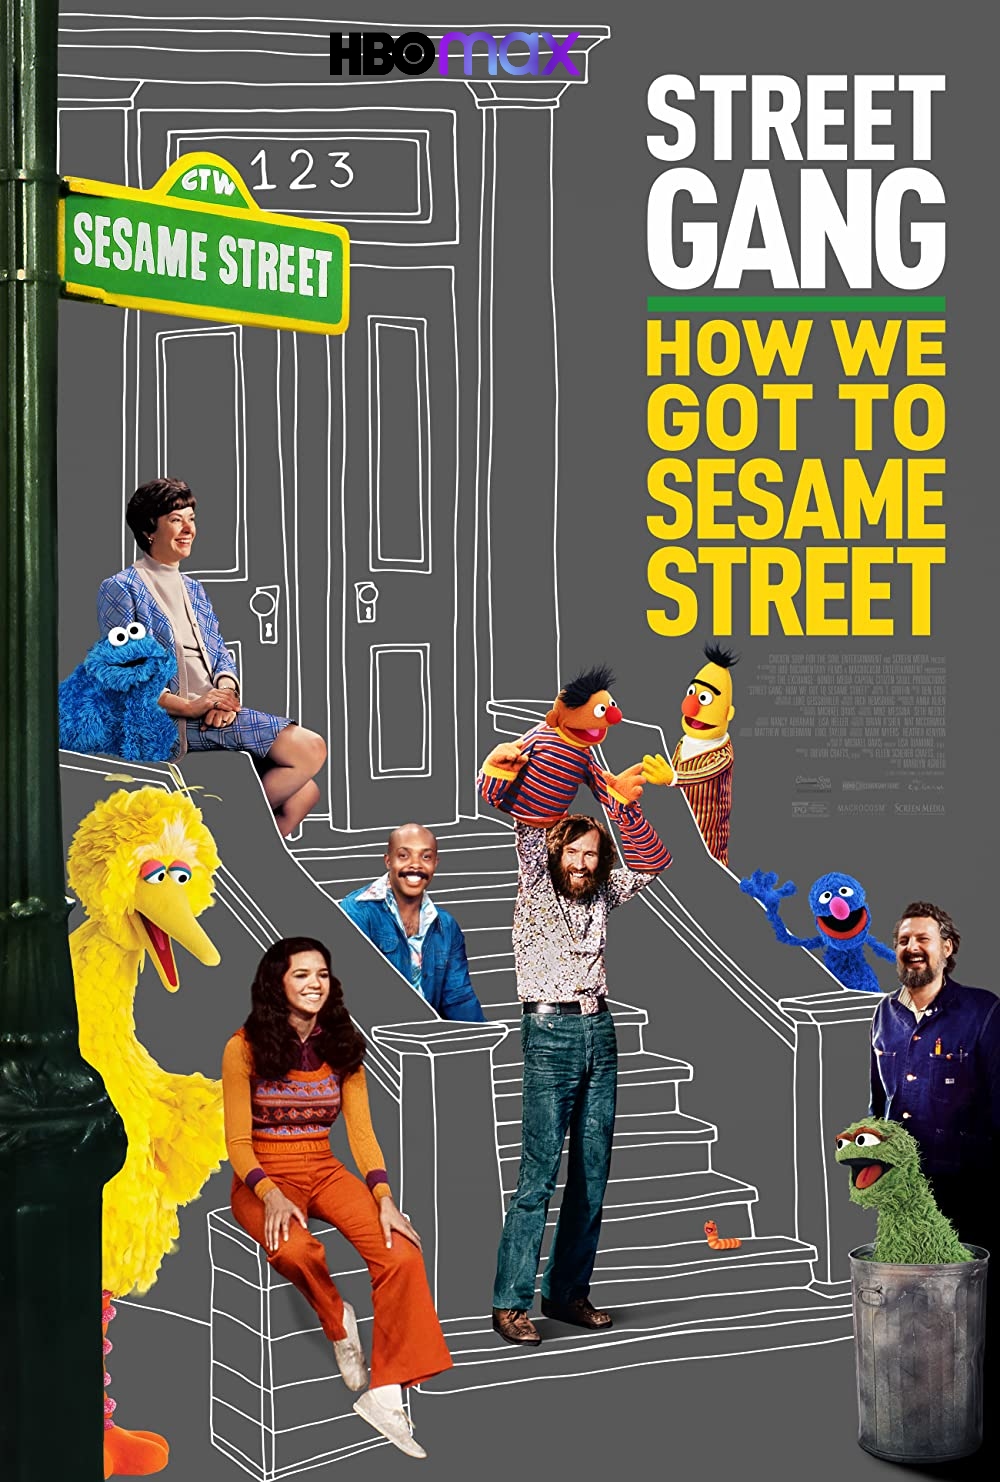 Is Street Gang How We Got to Sesame Street on HBO Max